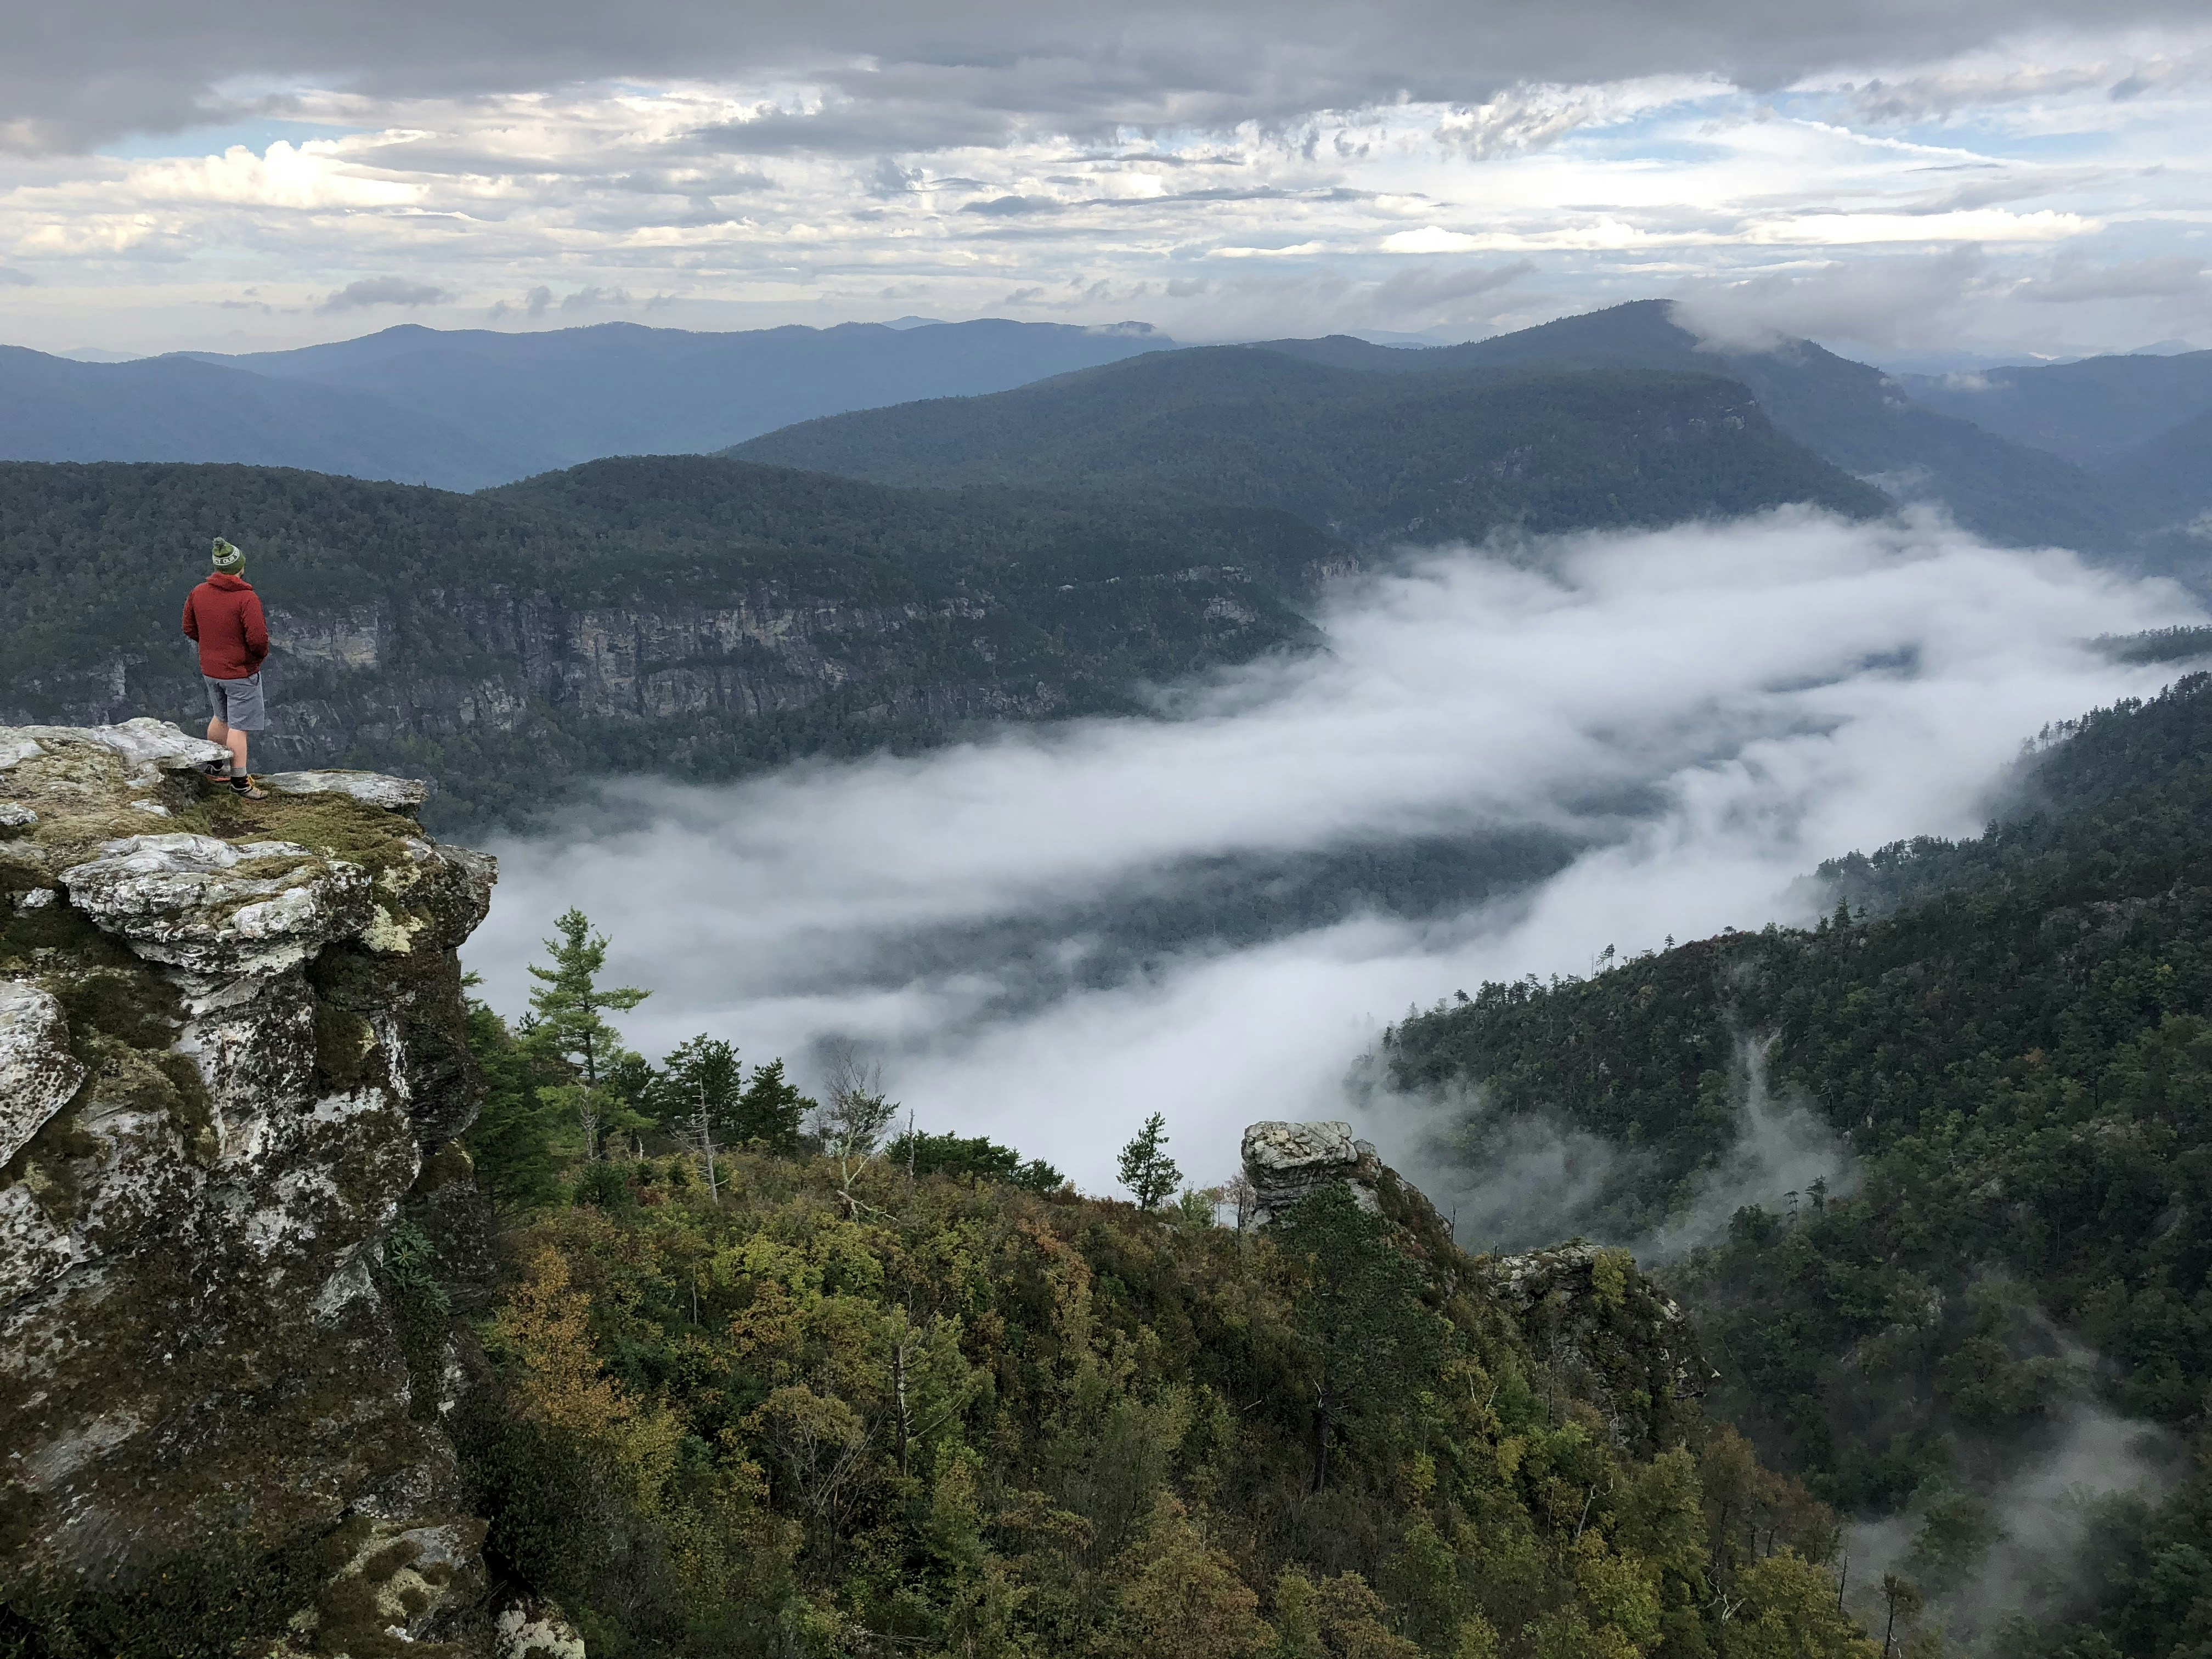 Atop the Chimneys, Linville Gorge, NC